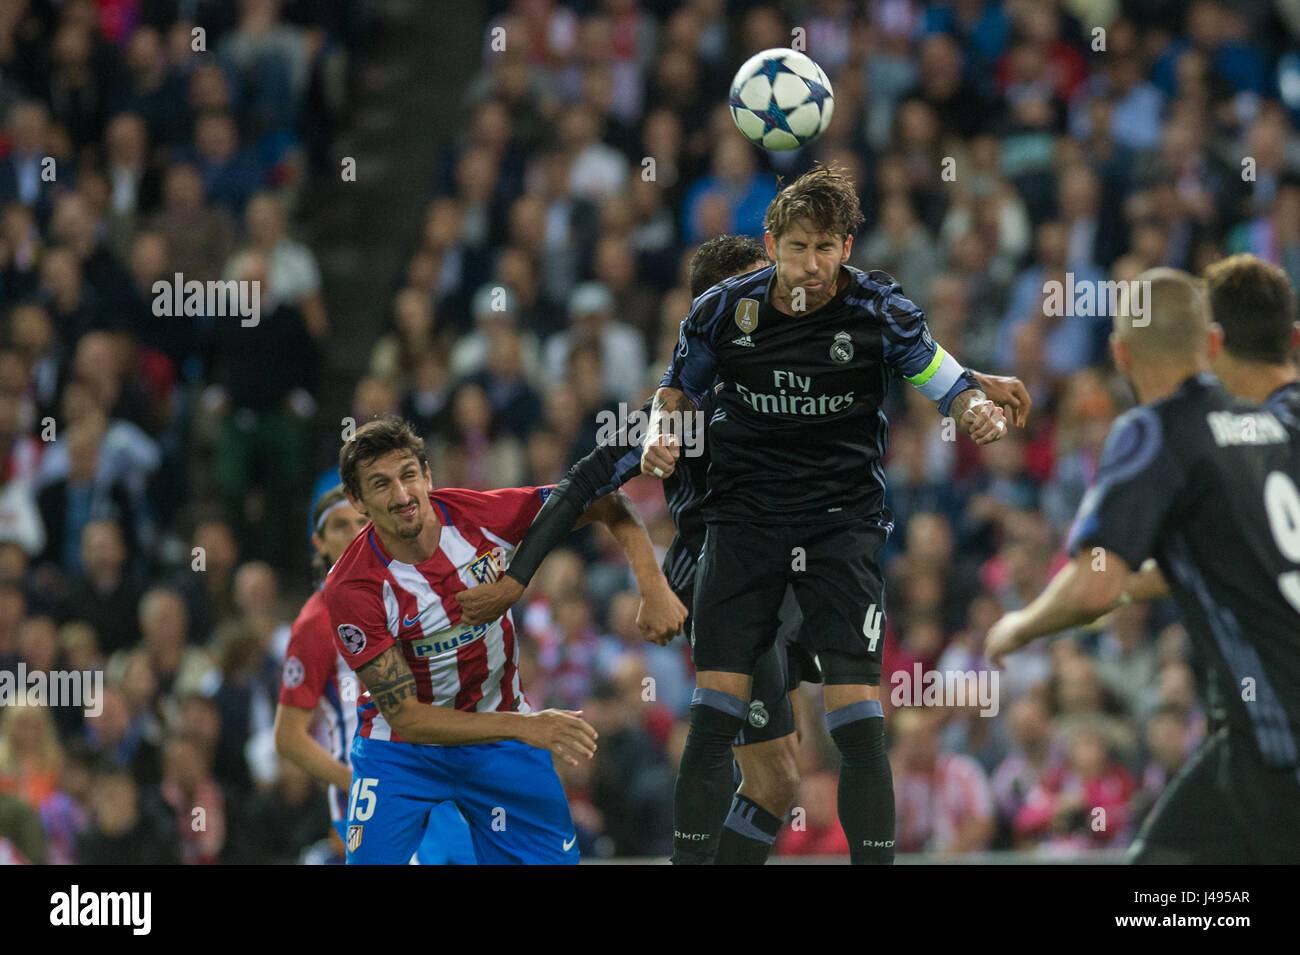 Madrid, Spain. 10th May, 2017. Sergio Ramos during a Champions League semifinal, 2nd leg soccer match between Atletico de Madrid and Real Madrid, in Madrid, Spain, Wednesday, May 10, 2017 Credit: Gtres Información más Comuniación on line,S.L./Alamy Live News Stock Photo